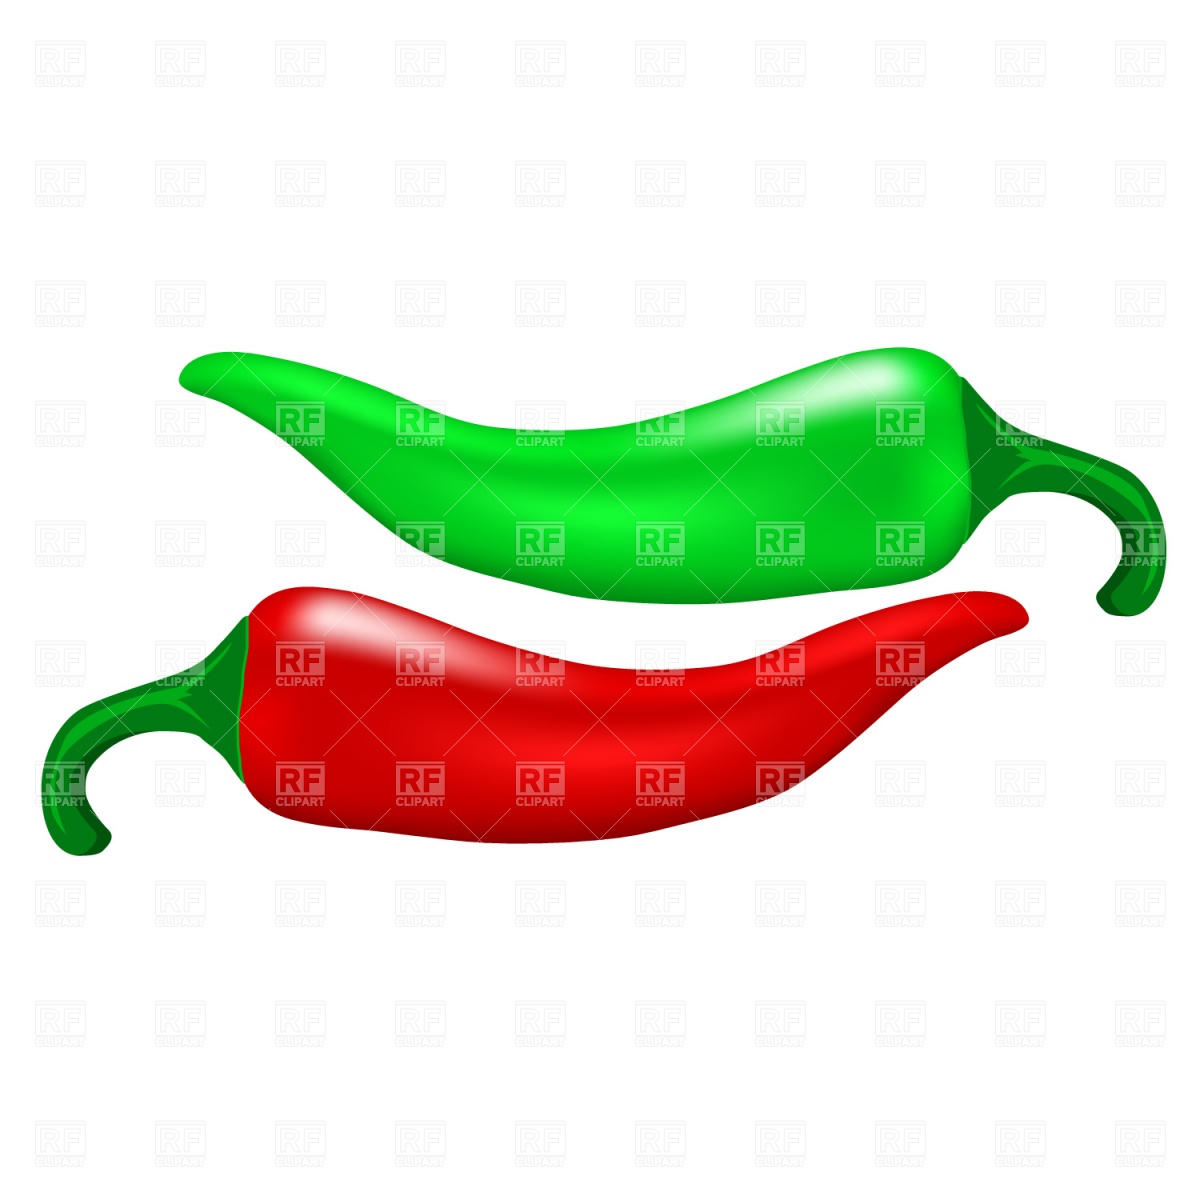 Pepper 1414 Food And Beverages Download Royalty Free Vector Clipart